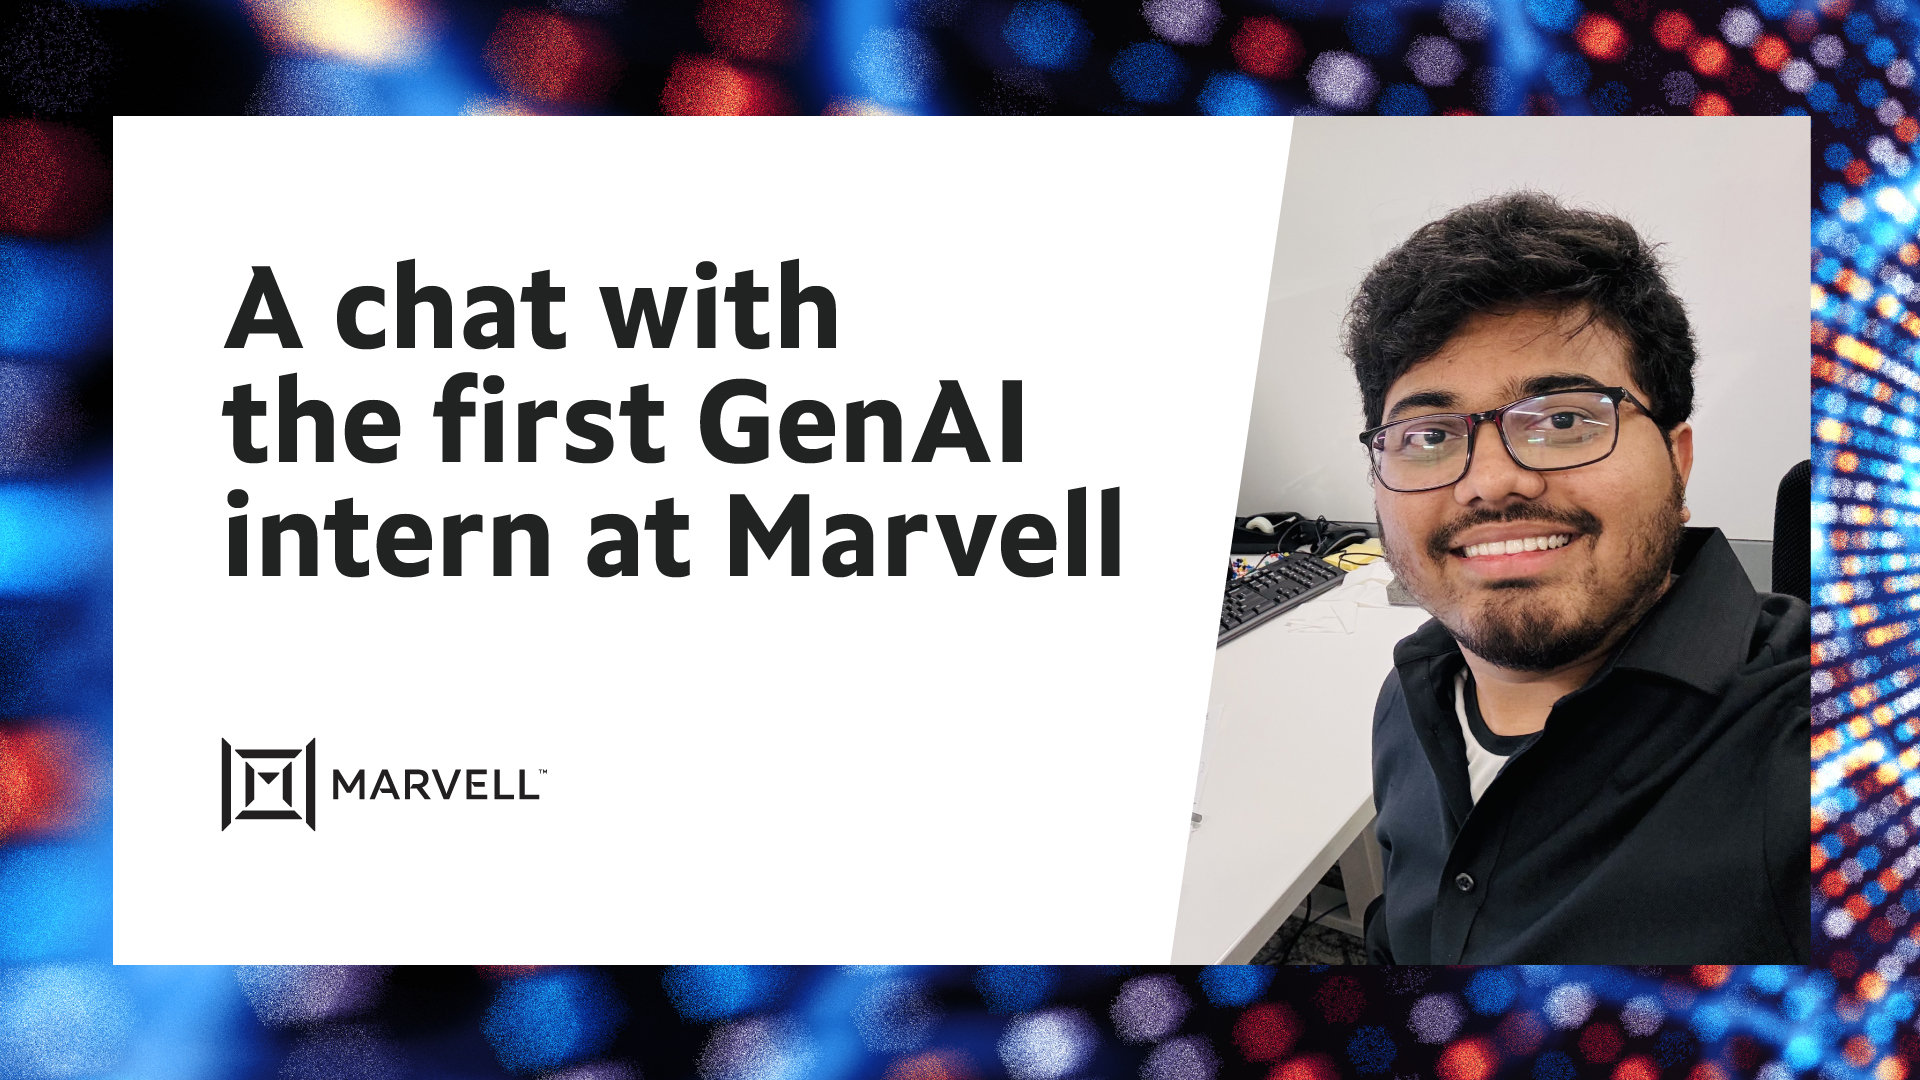 Marvell's first GenAI intern: A chat with Ejaz 